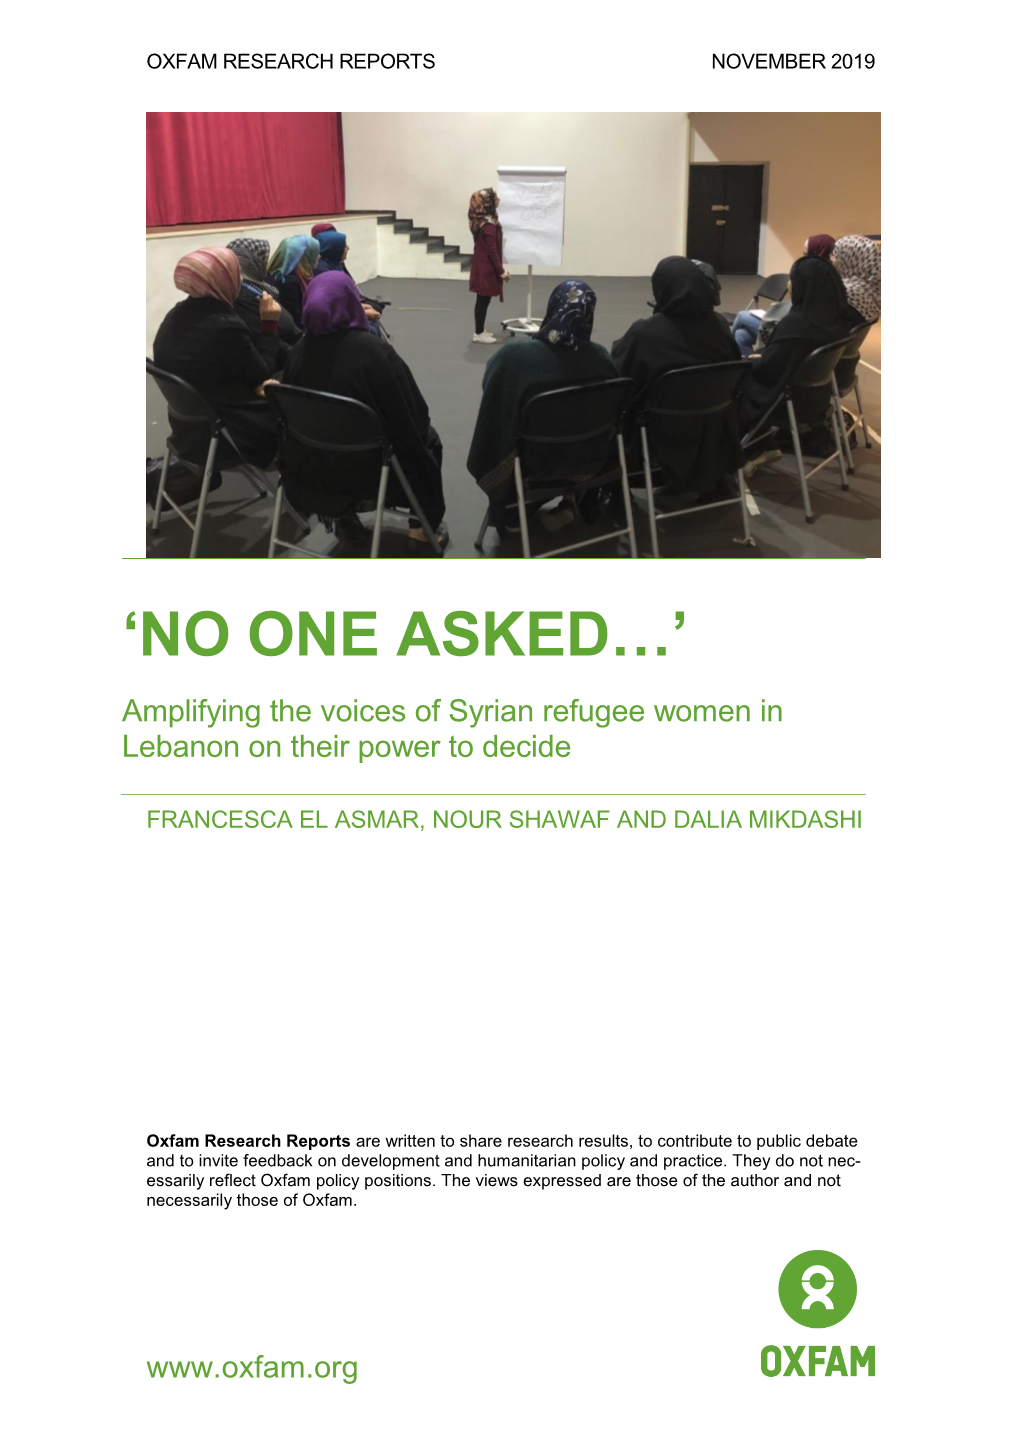 Amplifying the Voices of Syrian Refugee Women in Lebanon on Their Power to Decide